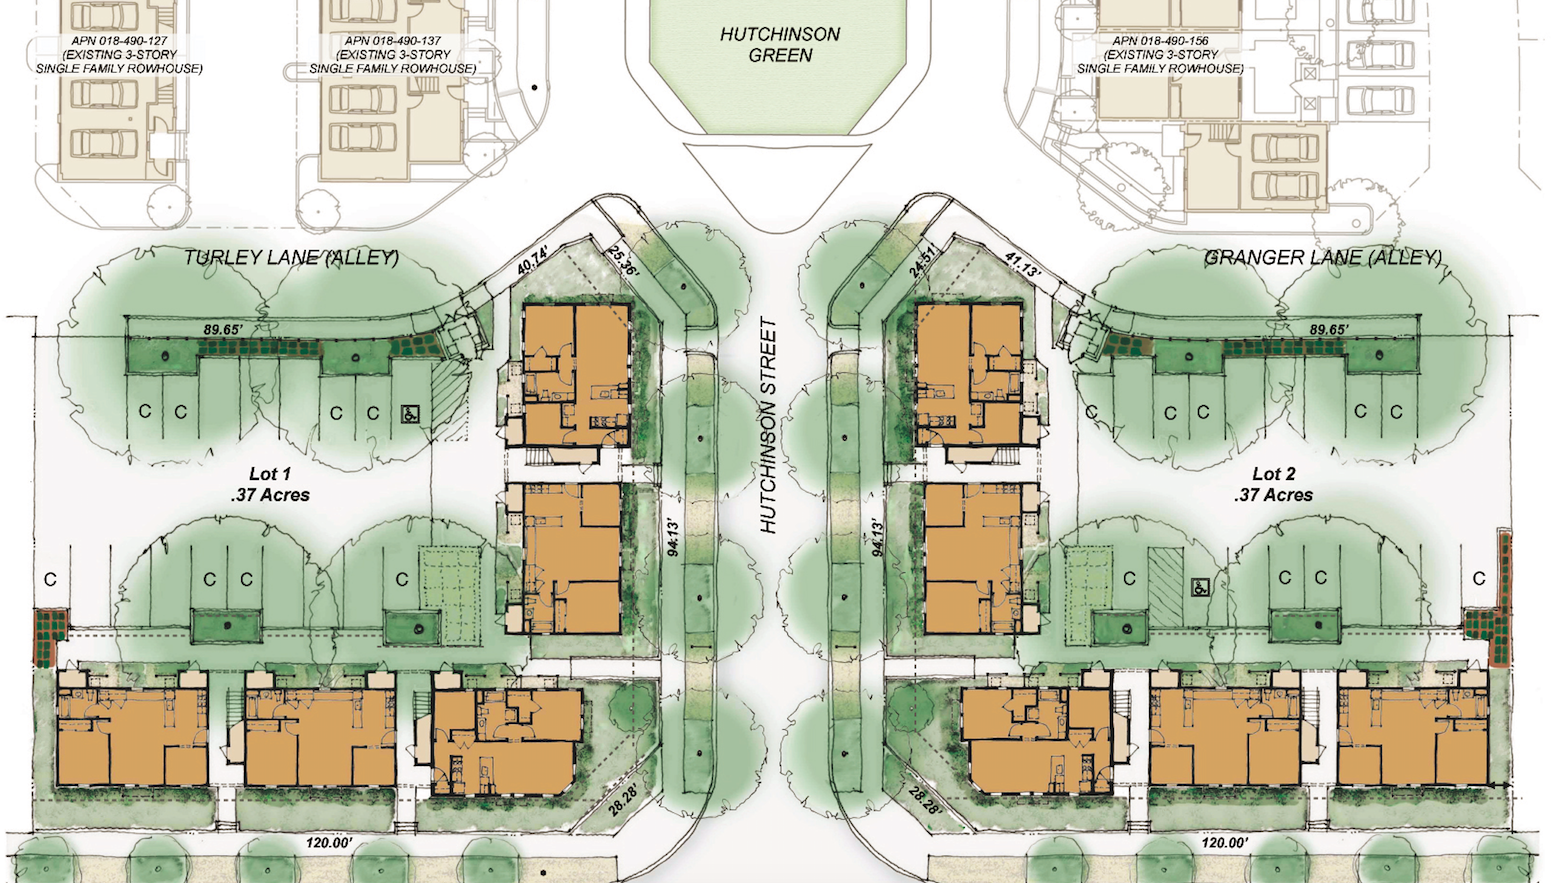 Site plan for Hutchinson Green Apartments, Chico, Calif.